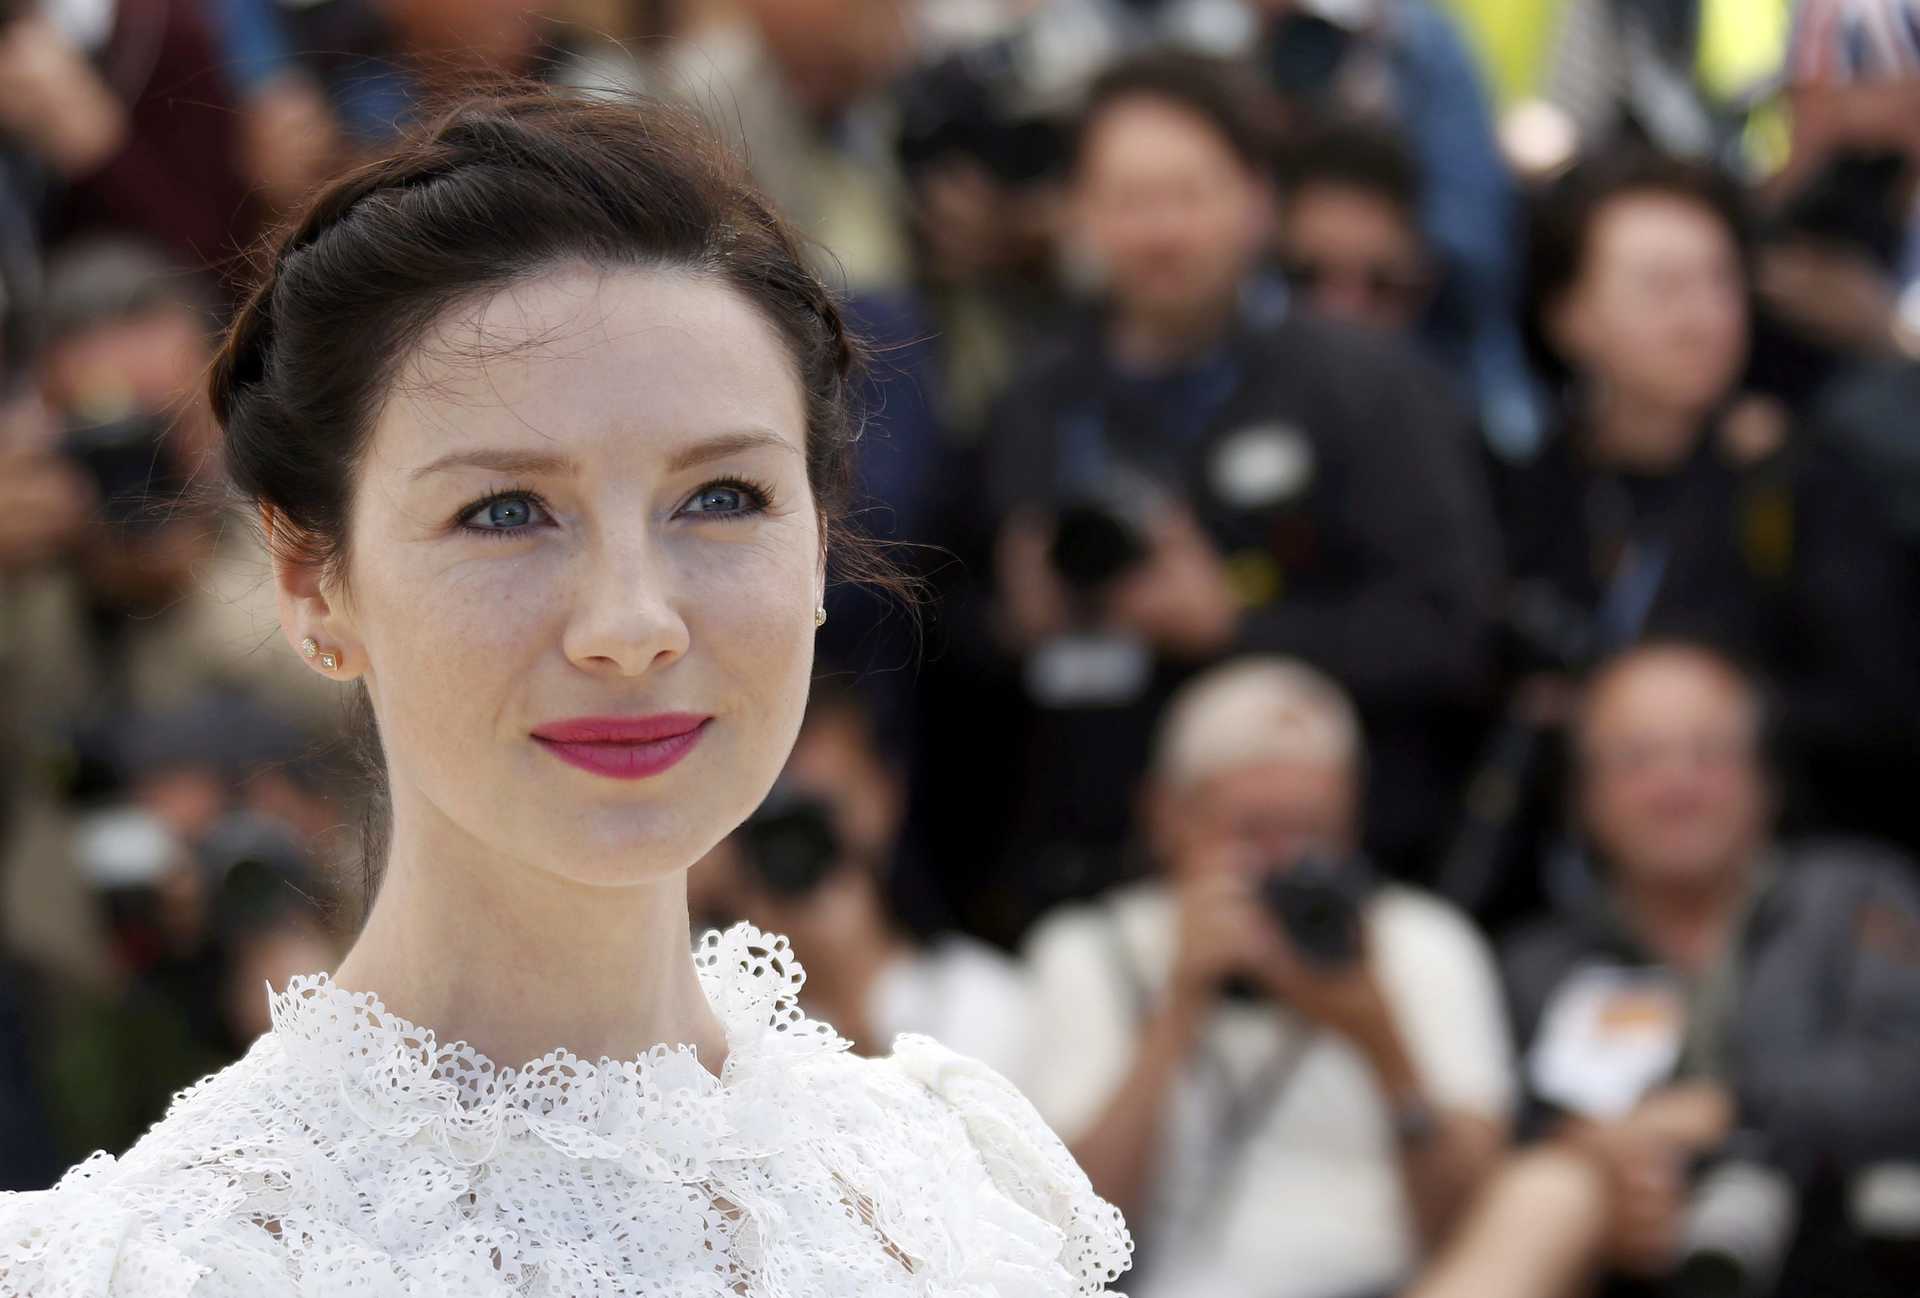 Cast member Caitriona Balfe poses during a photocall for the film “Money Monster” out of competition at the 69th Cannes Film Festival in Cannes